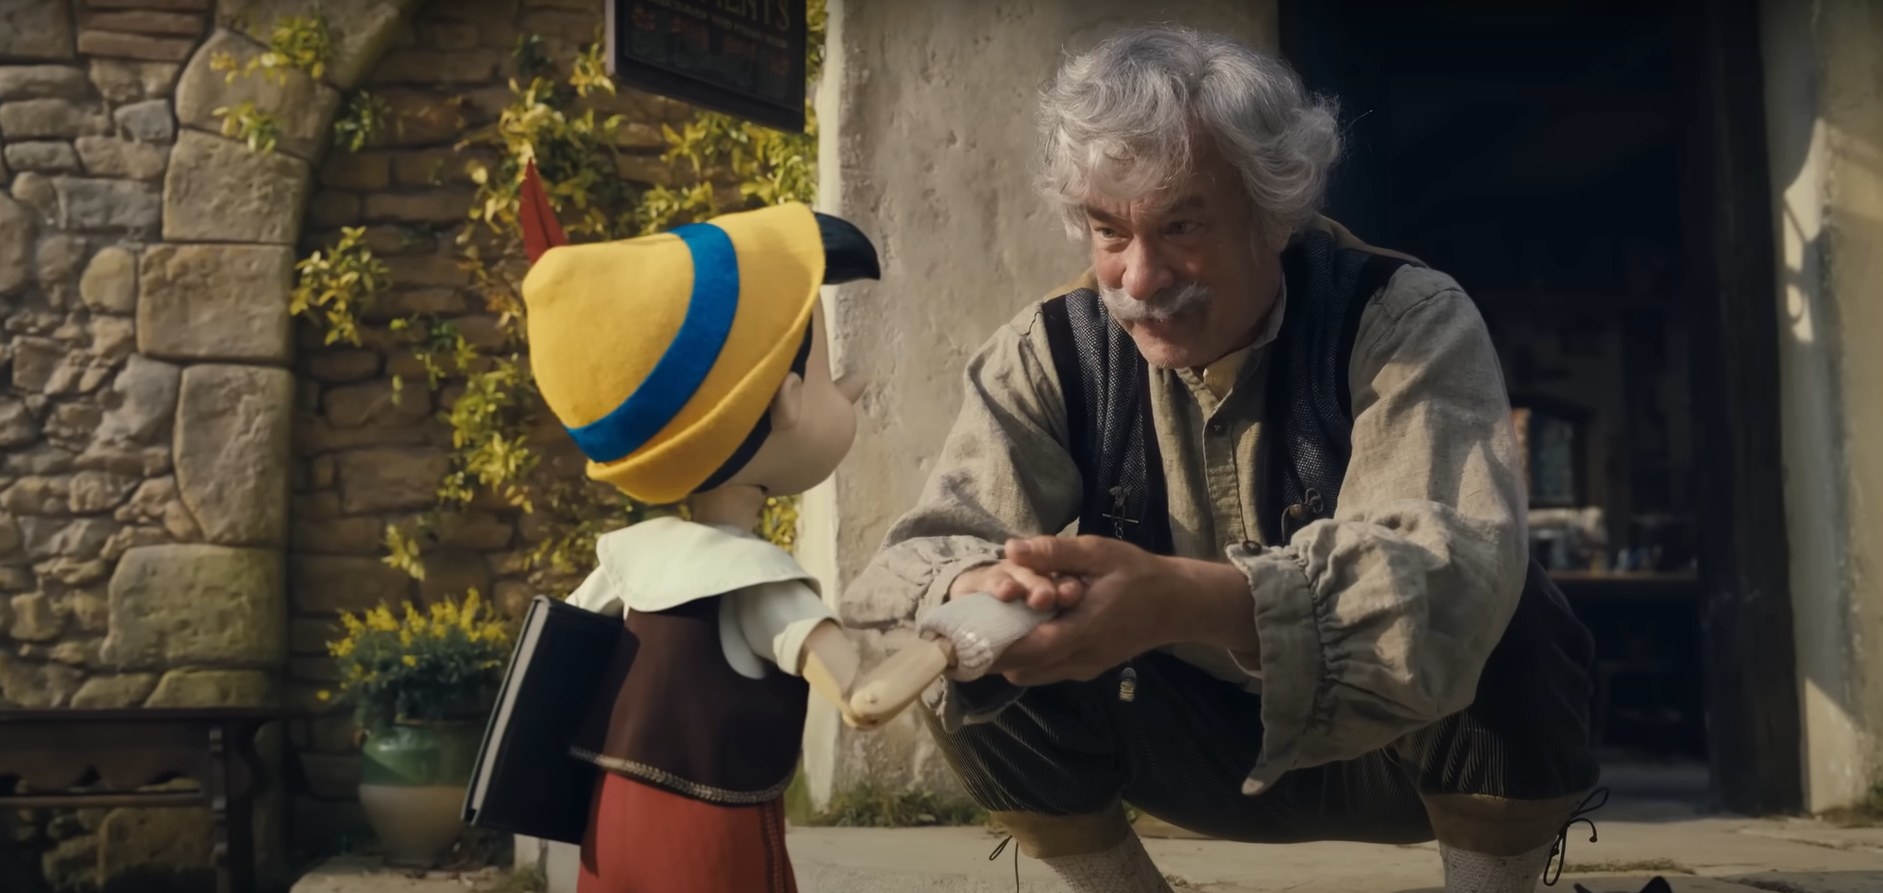 Geppetto, a live-action character, kneels to talk to Pinocchio, an animated figure. They are exchanging a heartfelt gesture